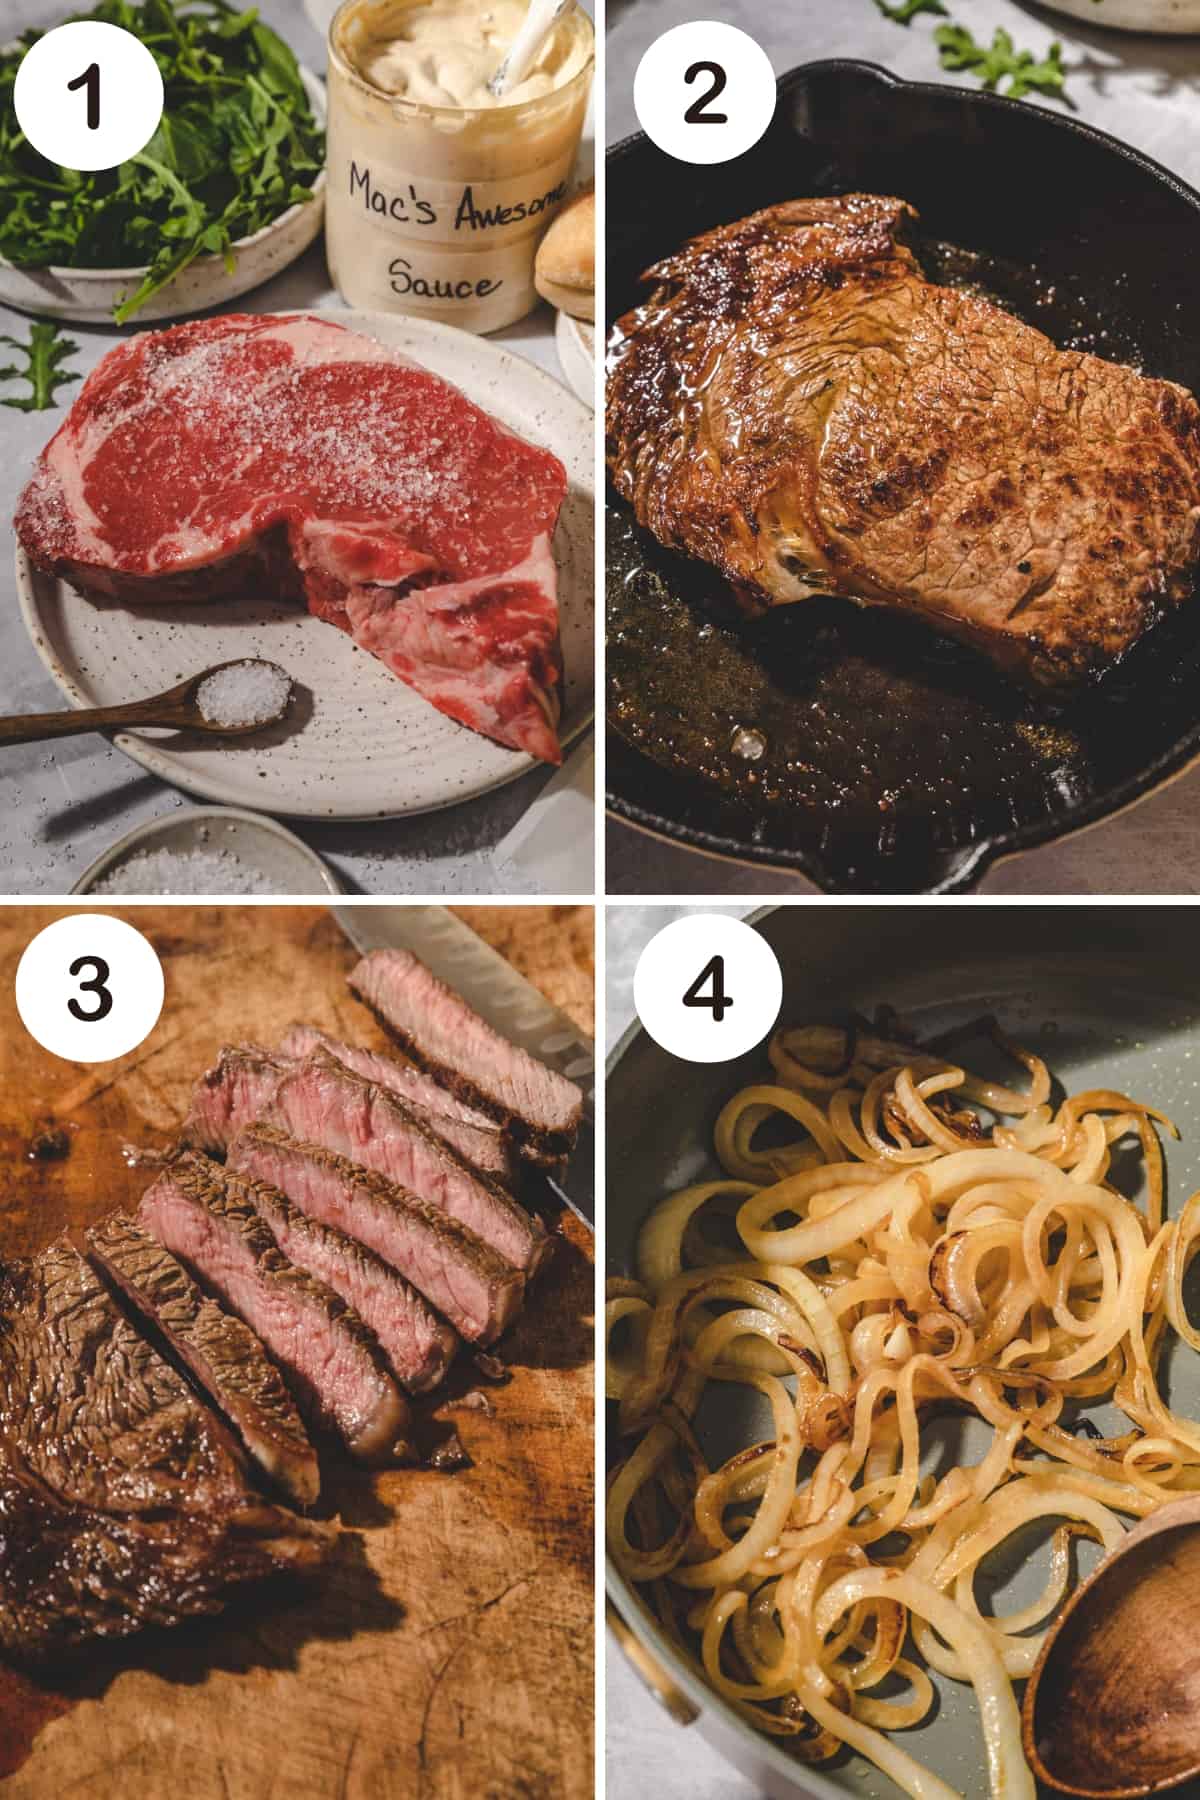 numbered step by step photos showing how to grill and slice a ribeye steak